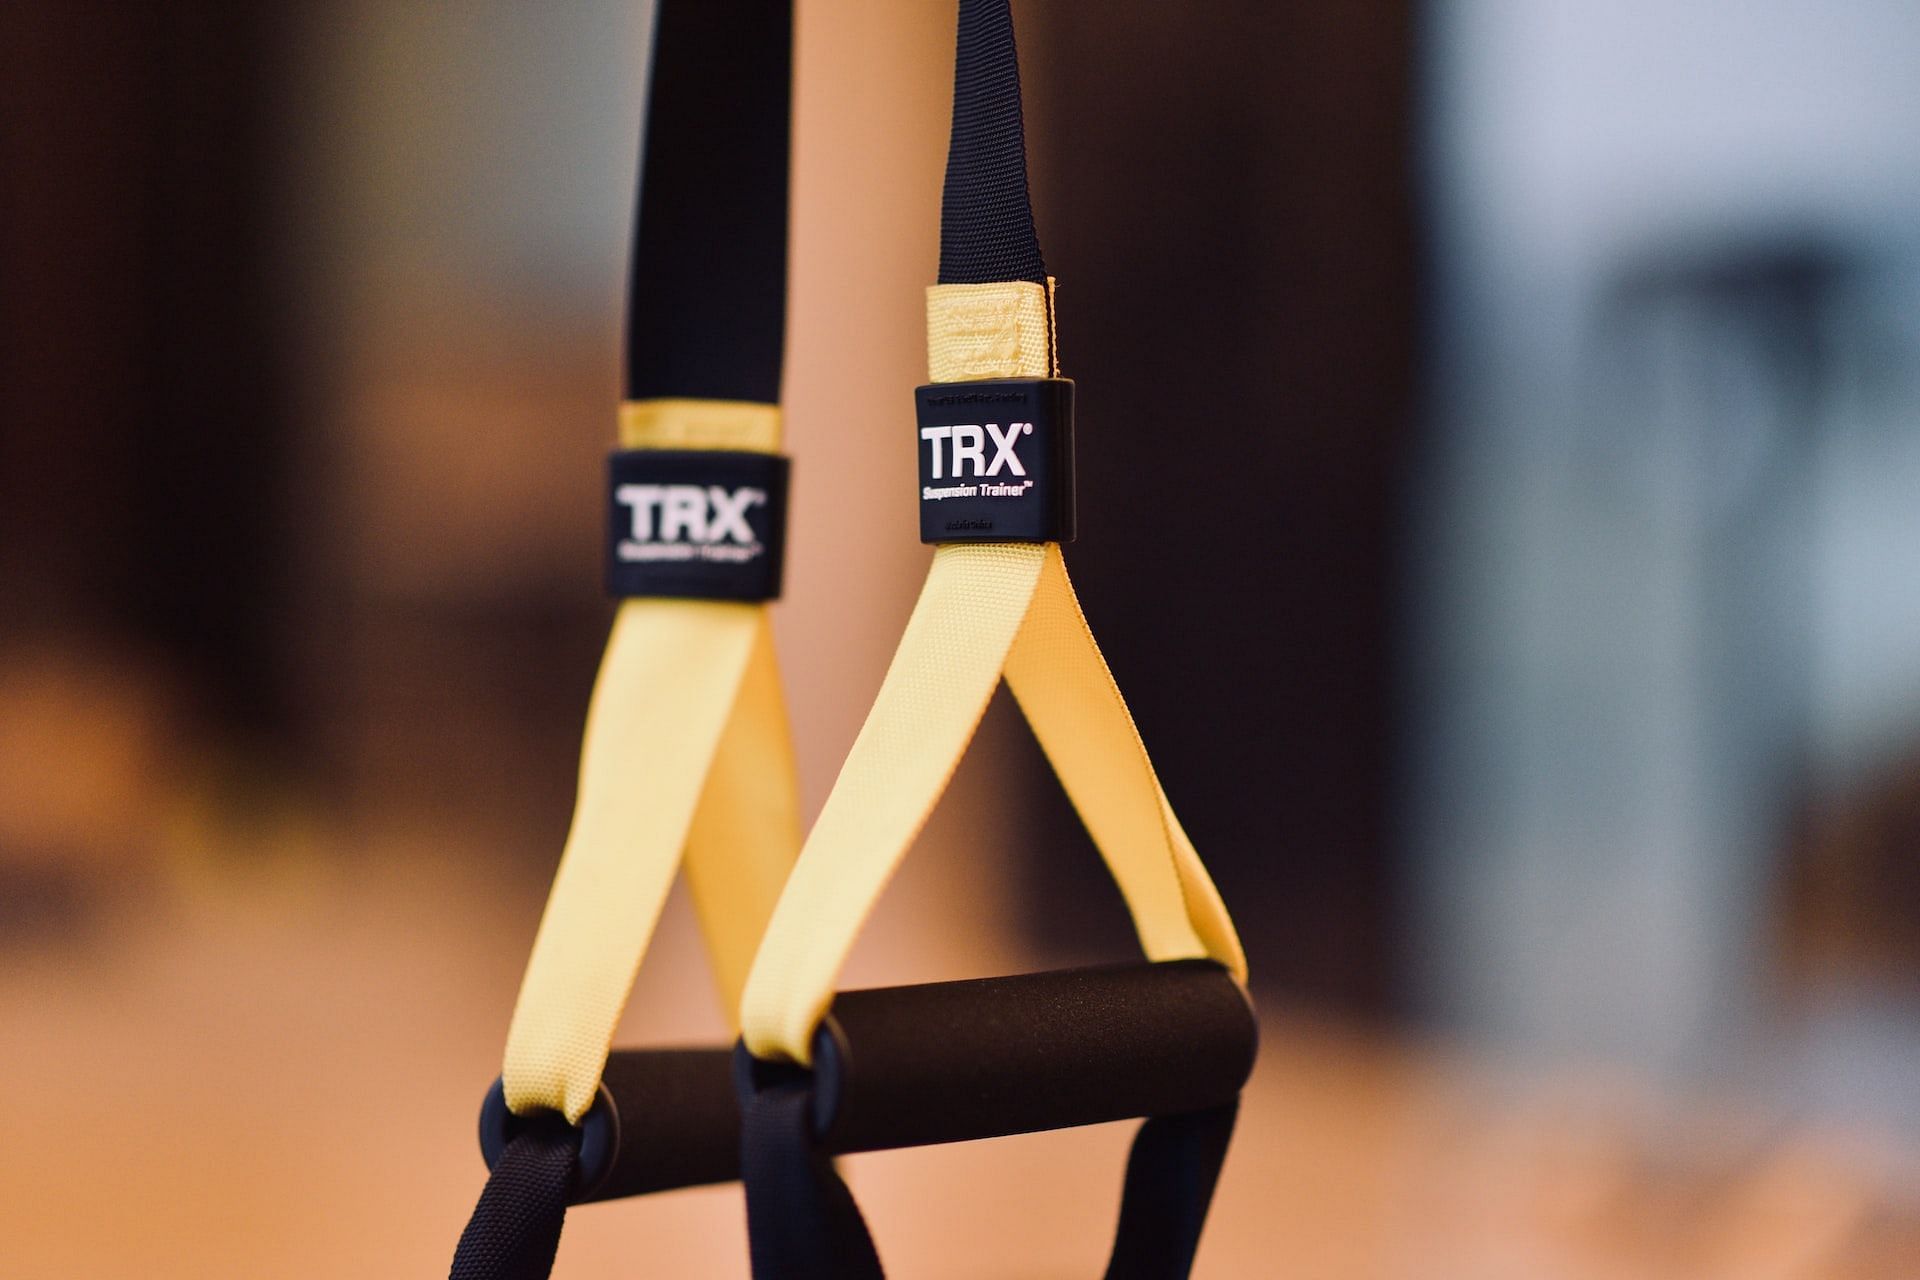 TRX exercises for upper body strength. (Photo by deepigoyal on Unsplash)